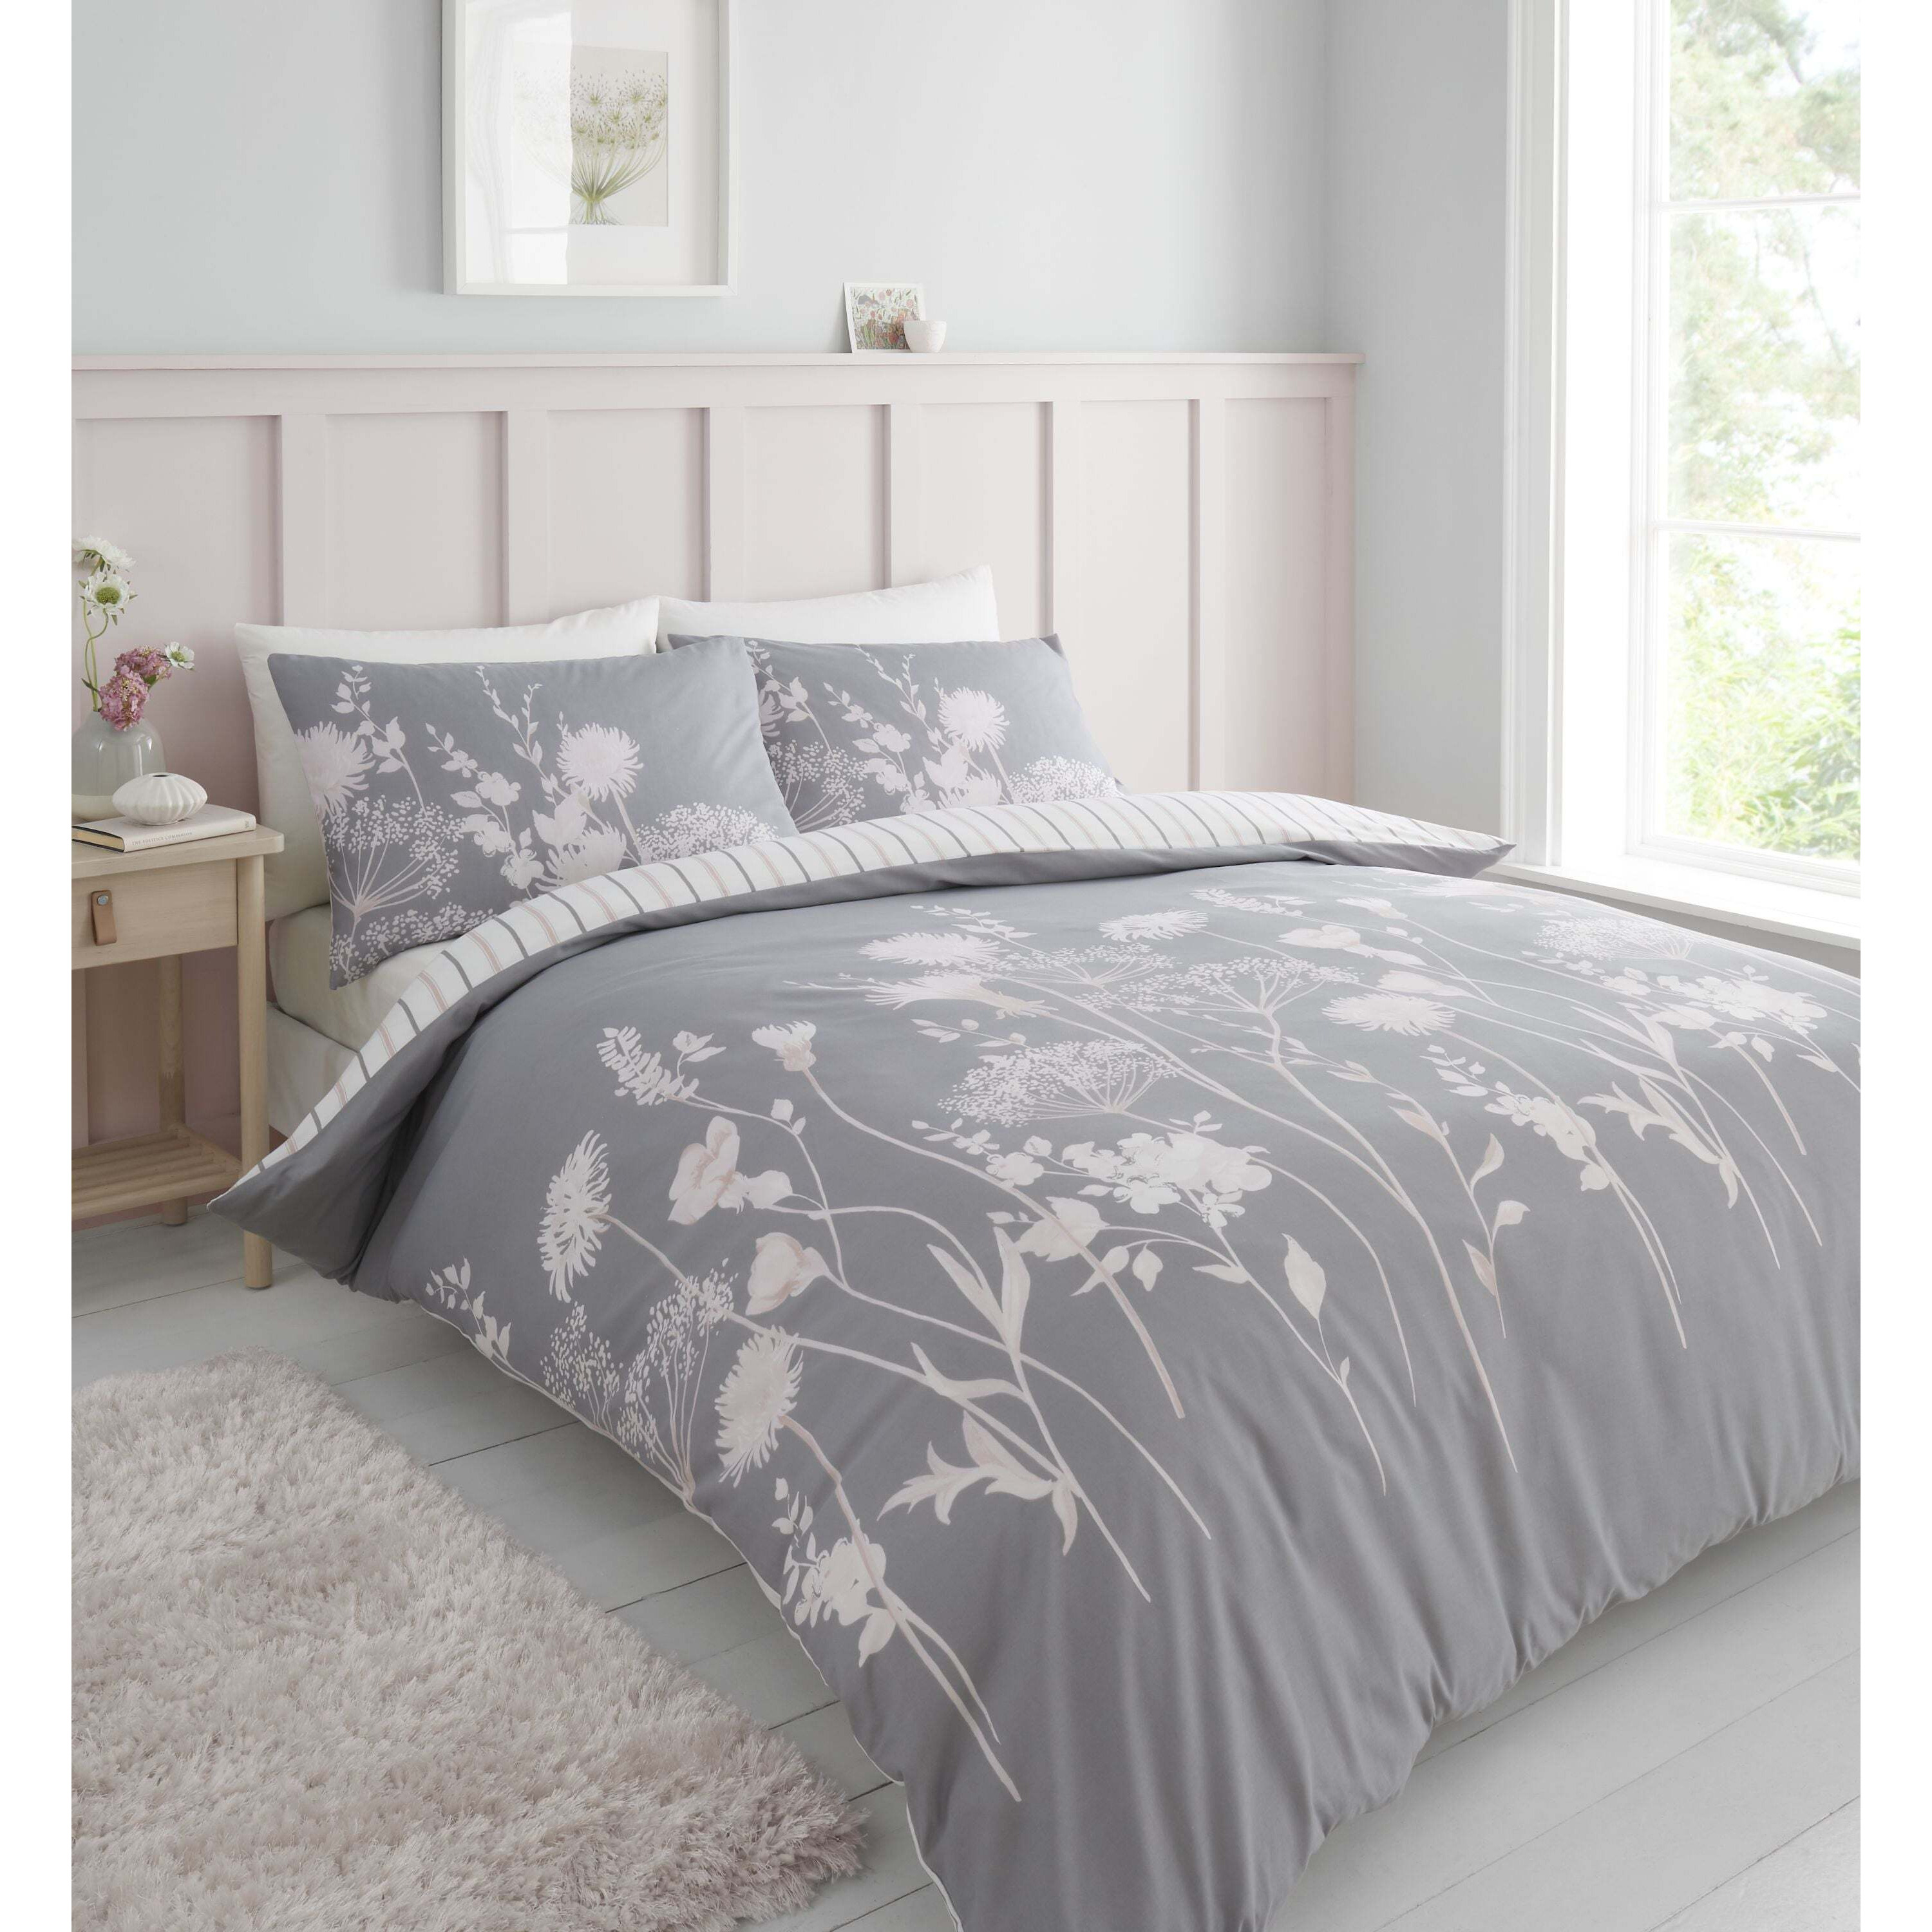 Catherine Lansfield Meadowsweet Floral Pink Duvet Cover and Pillowcase Set Pink